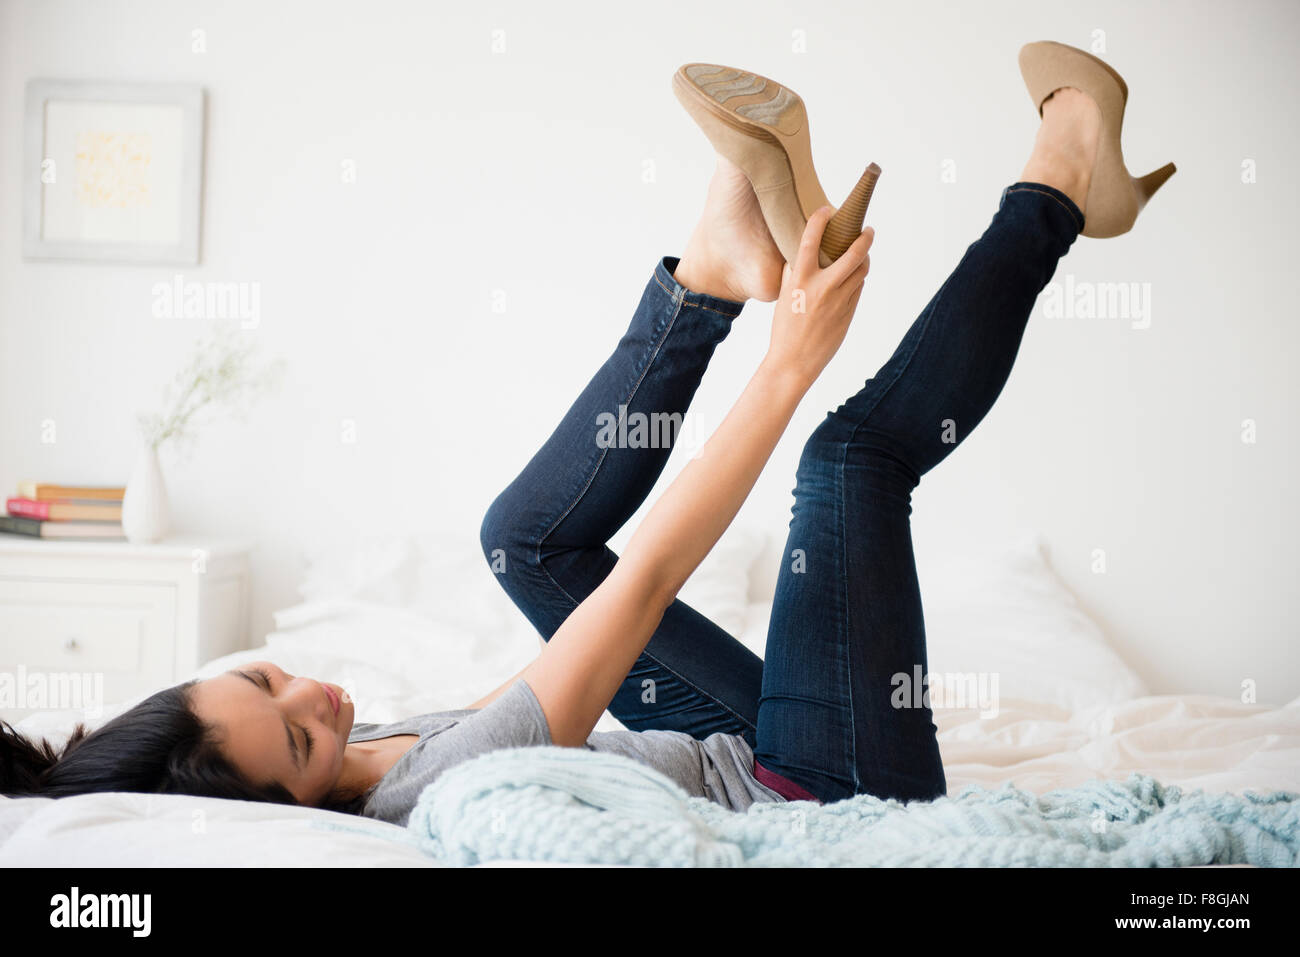 Chinese woman trying on shoes on bed Stock Photo